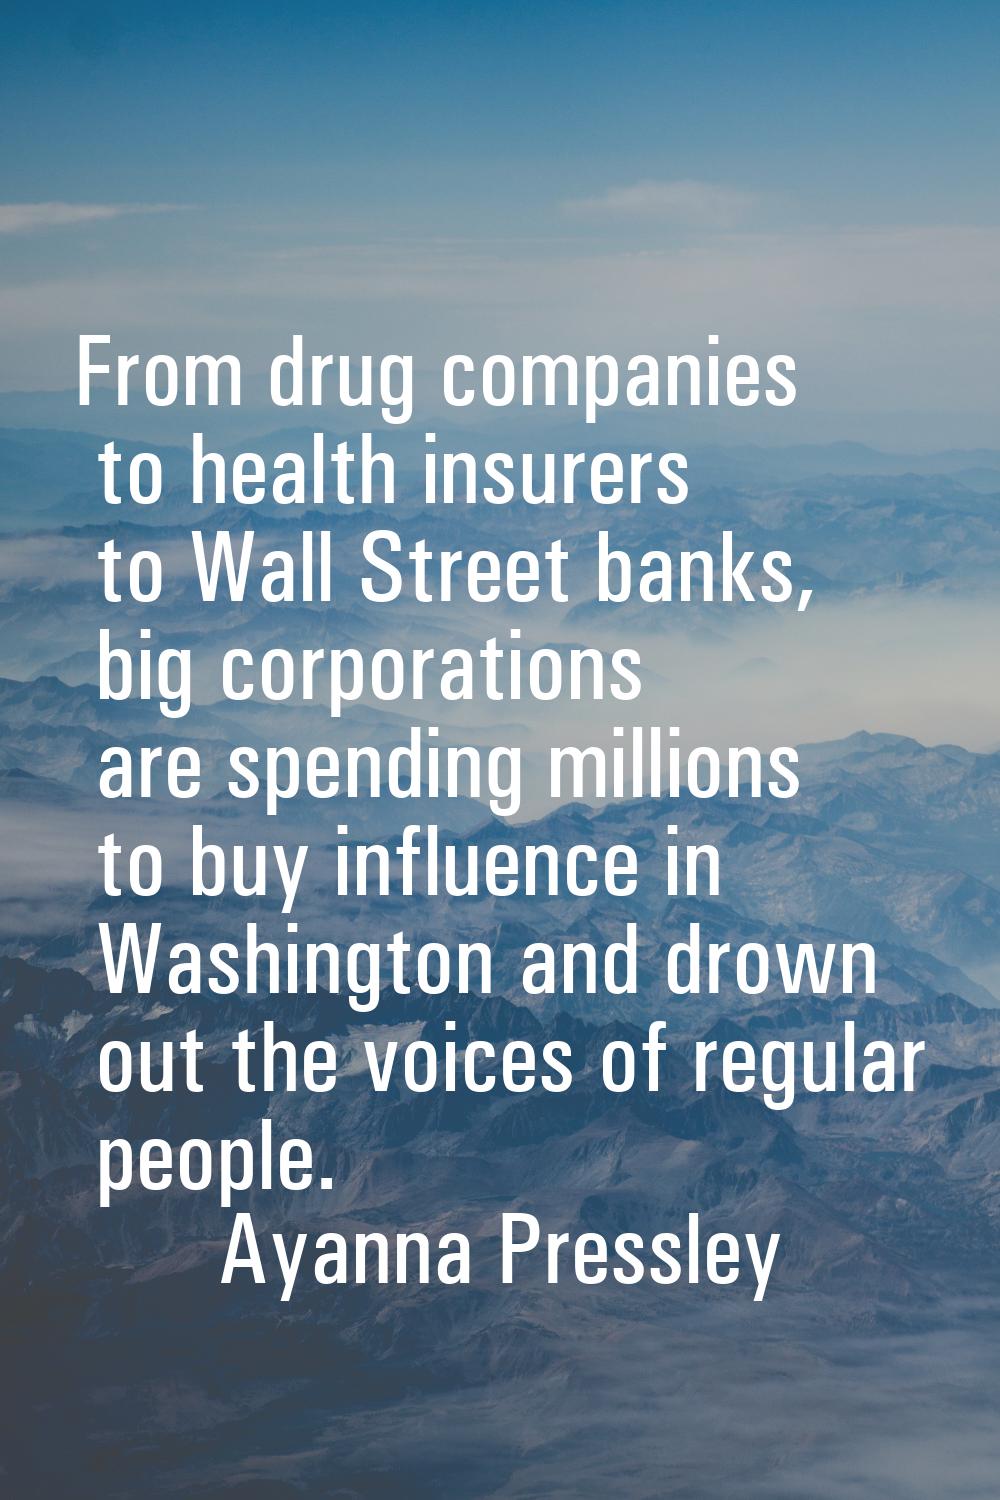 From drug companies to health insurers to Wall Street banks, big corporations are spending millions